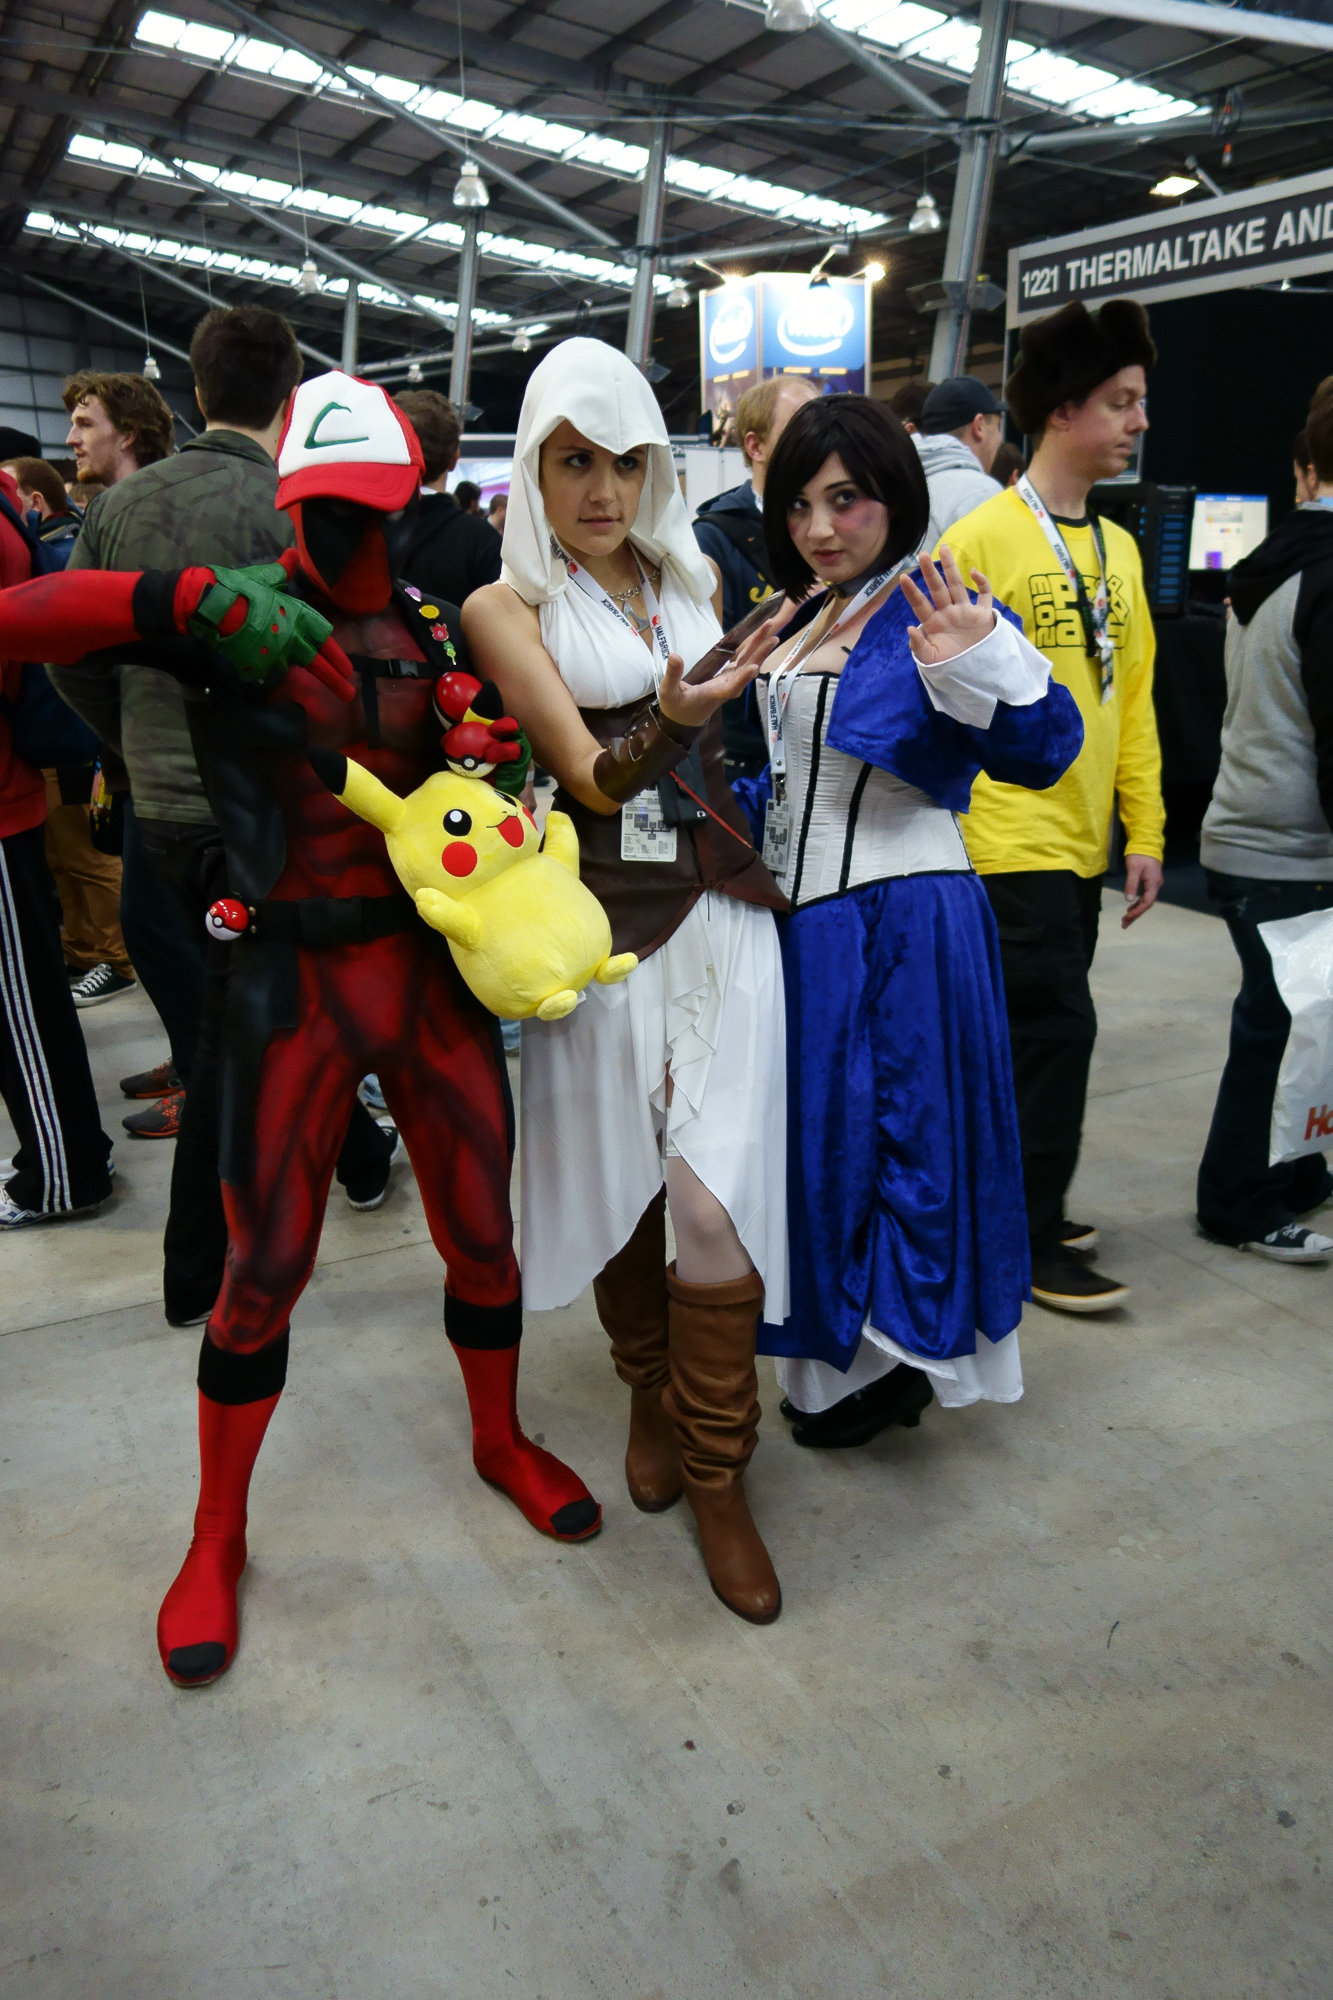 Lots of cosplay at PAX this year. L-R: Venom/Ash Ketchum, female Desmond from Assassin's Creed, and Elizabeth from Bioshock Infinite (that last one was super popular)